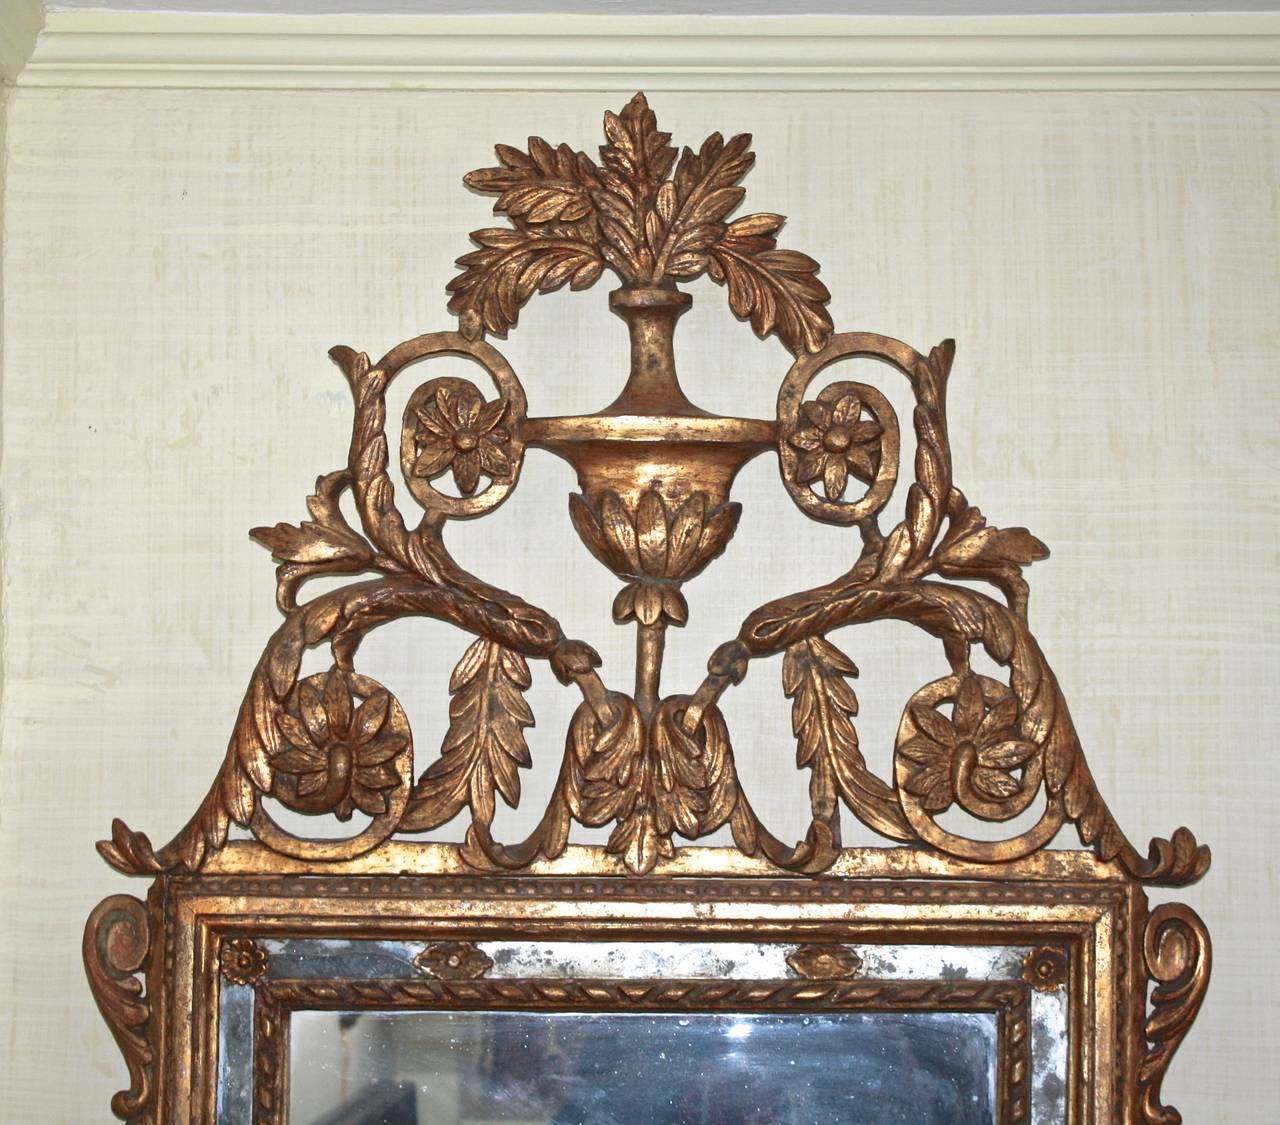 Italian antiques of Piedmontese origin are prized by knowledgeable collectors
for their scarcity. This specimen mirror appears to be fully original and 'as made' in the last quarter of the 18th century, right down to its backboards;
with the sole